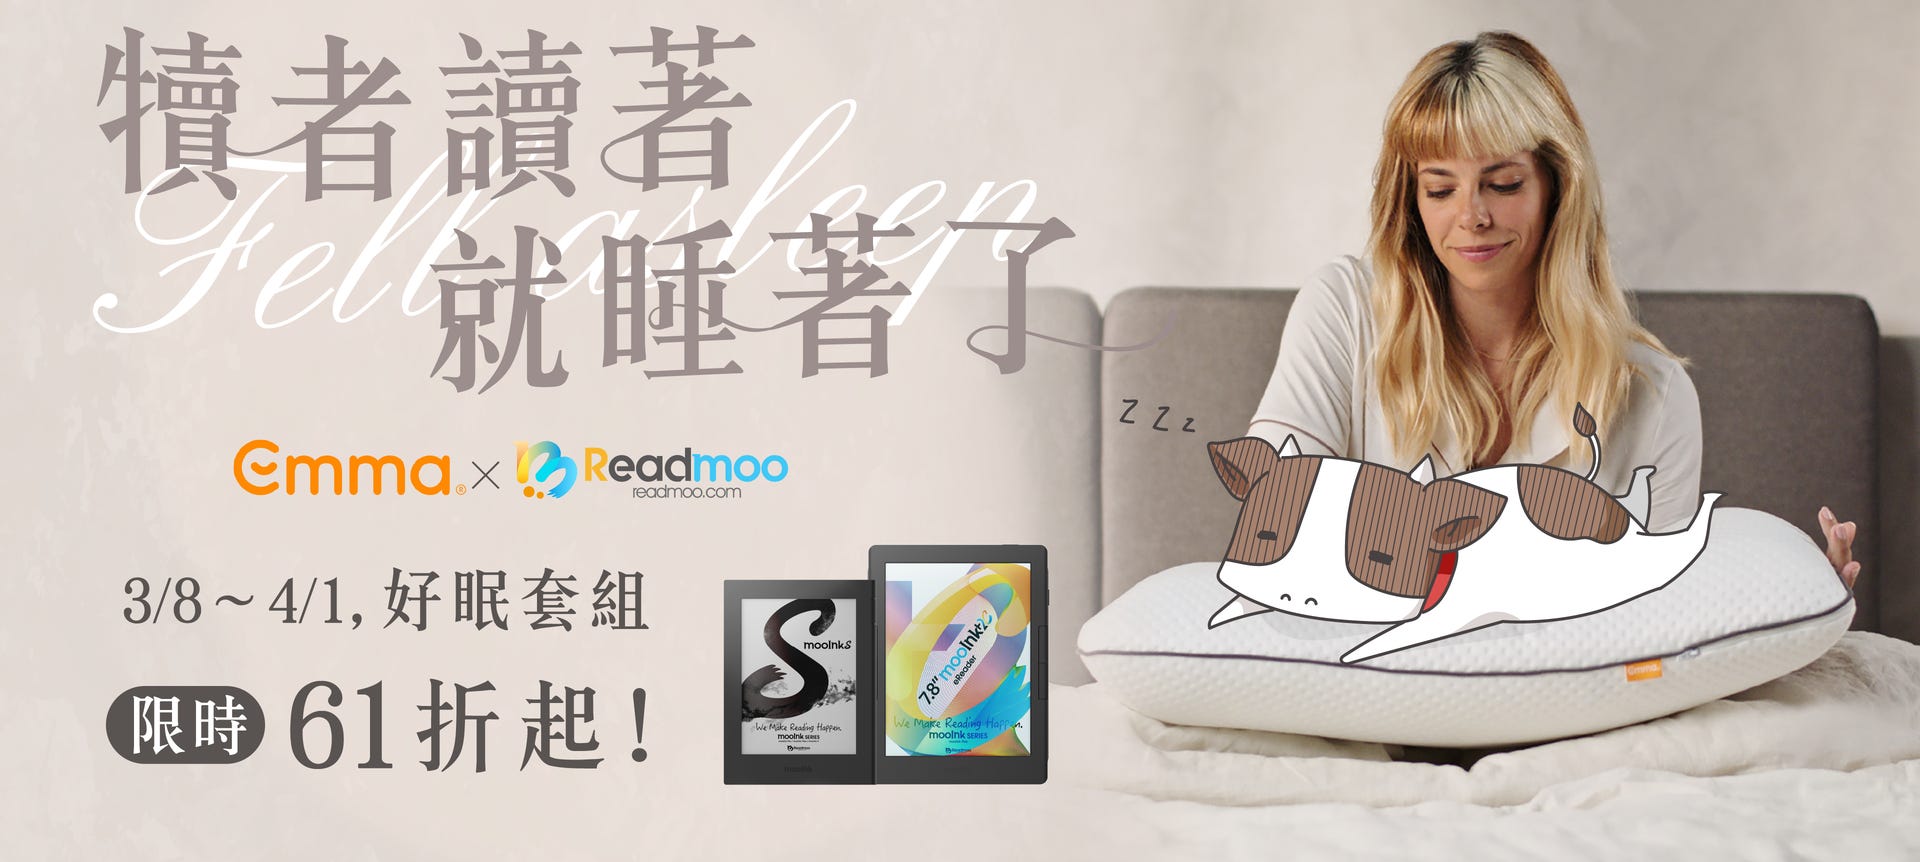 Readmoo_sales_banner.png